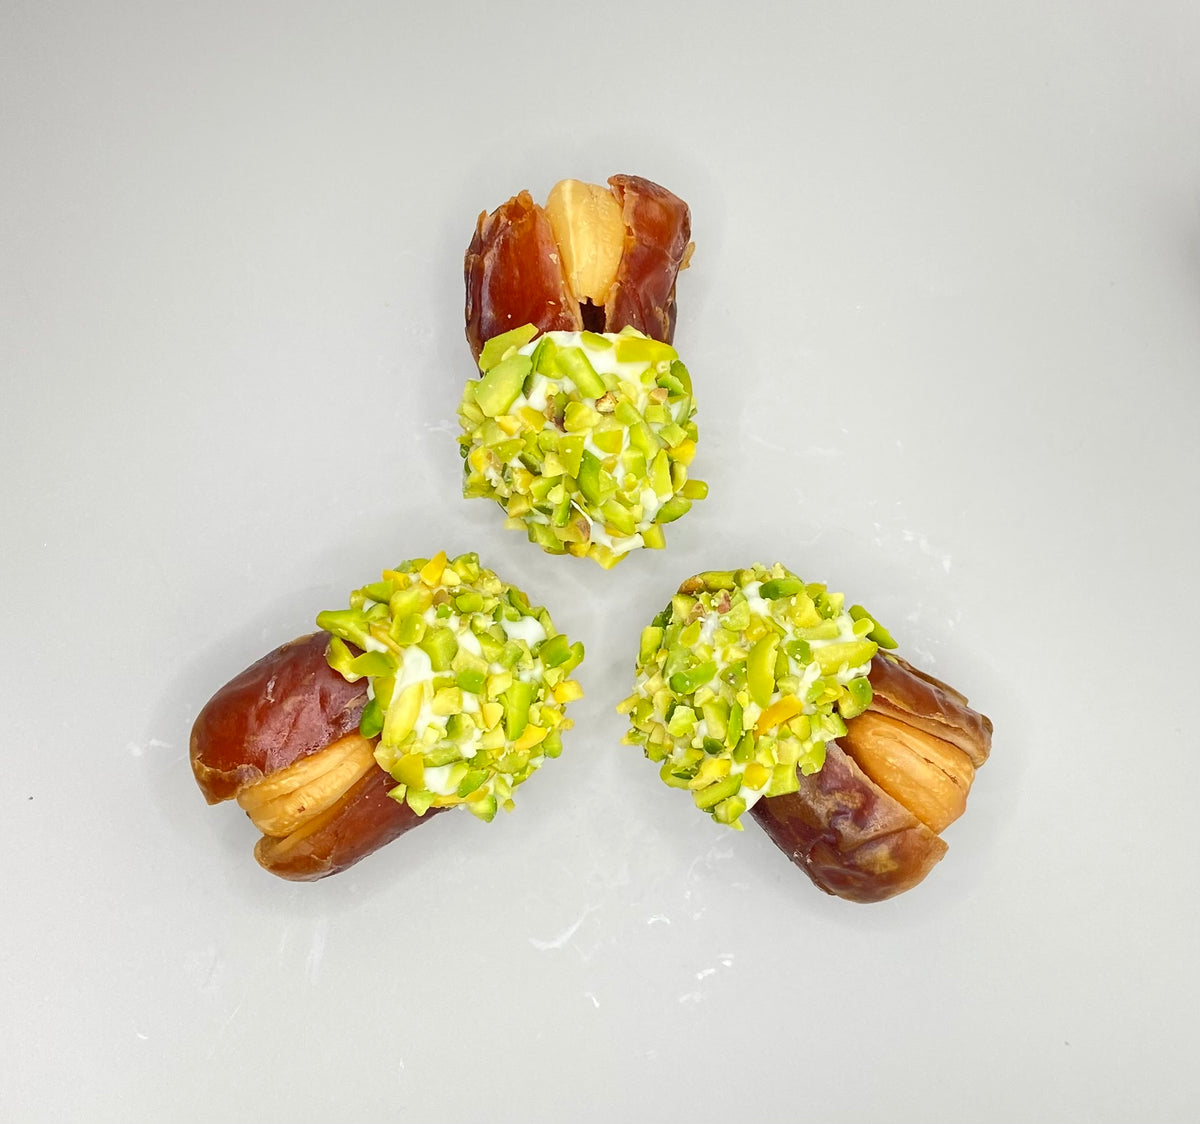 Pistachio Chocolate Dates Stuffed With Nuts